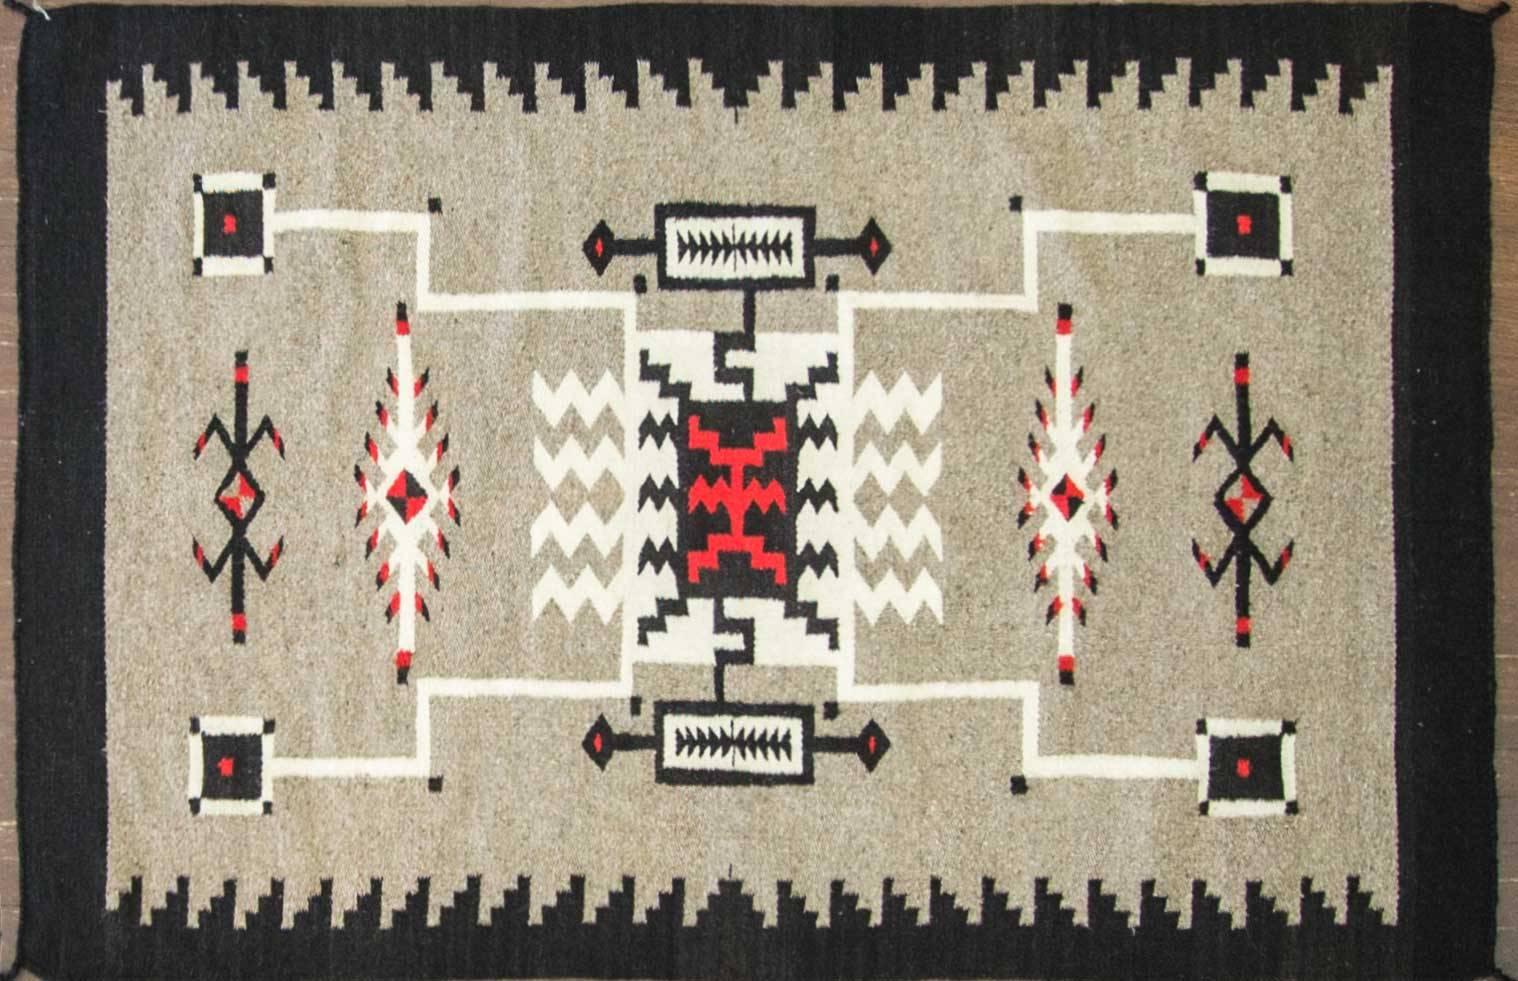 Two grey hills arose as a regional style center during the 1940s. These Navajo Indian rugs are distinguished by the bordered central lozenge design, and use of primarily undyed wools in tan, gray, brown, white and deep black. Borders are often